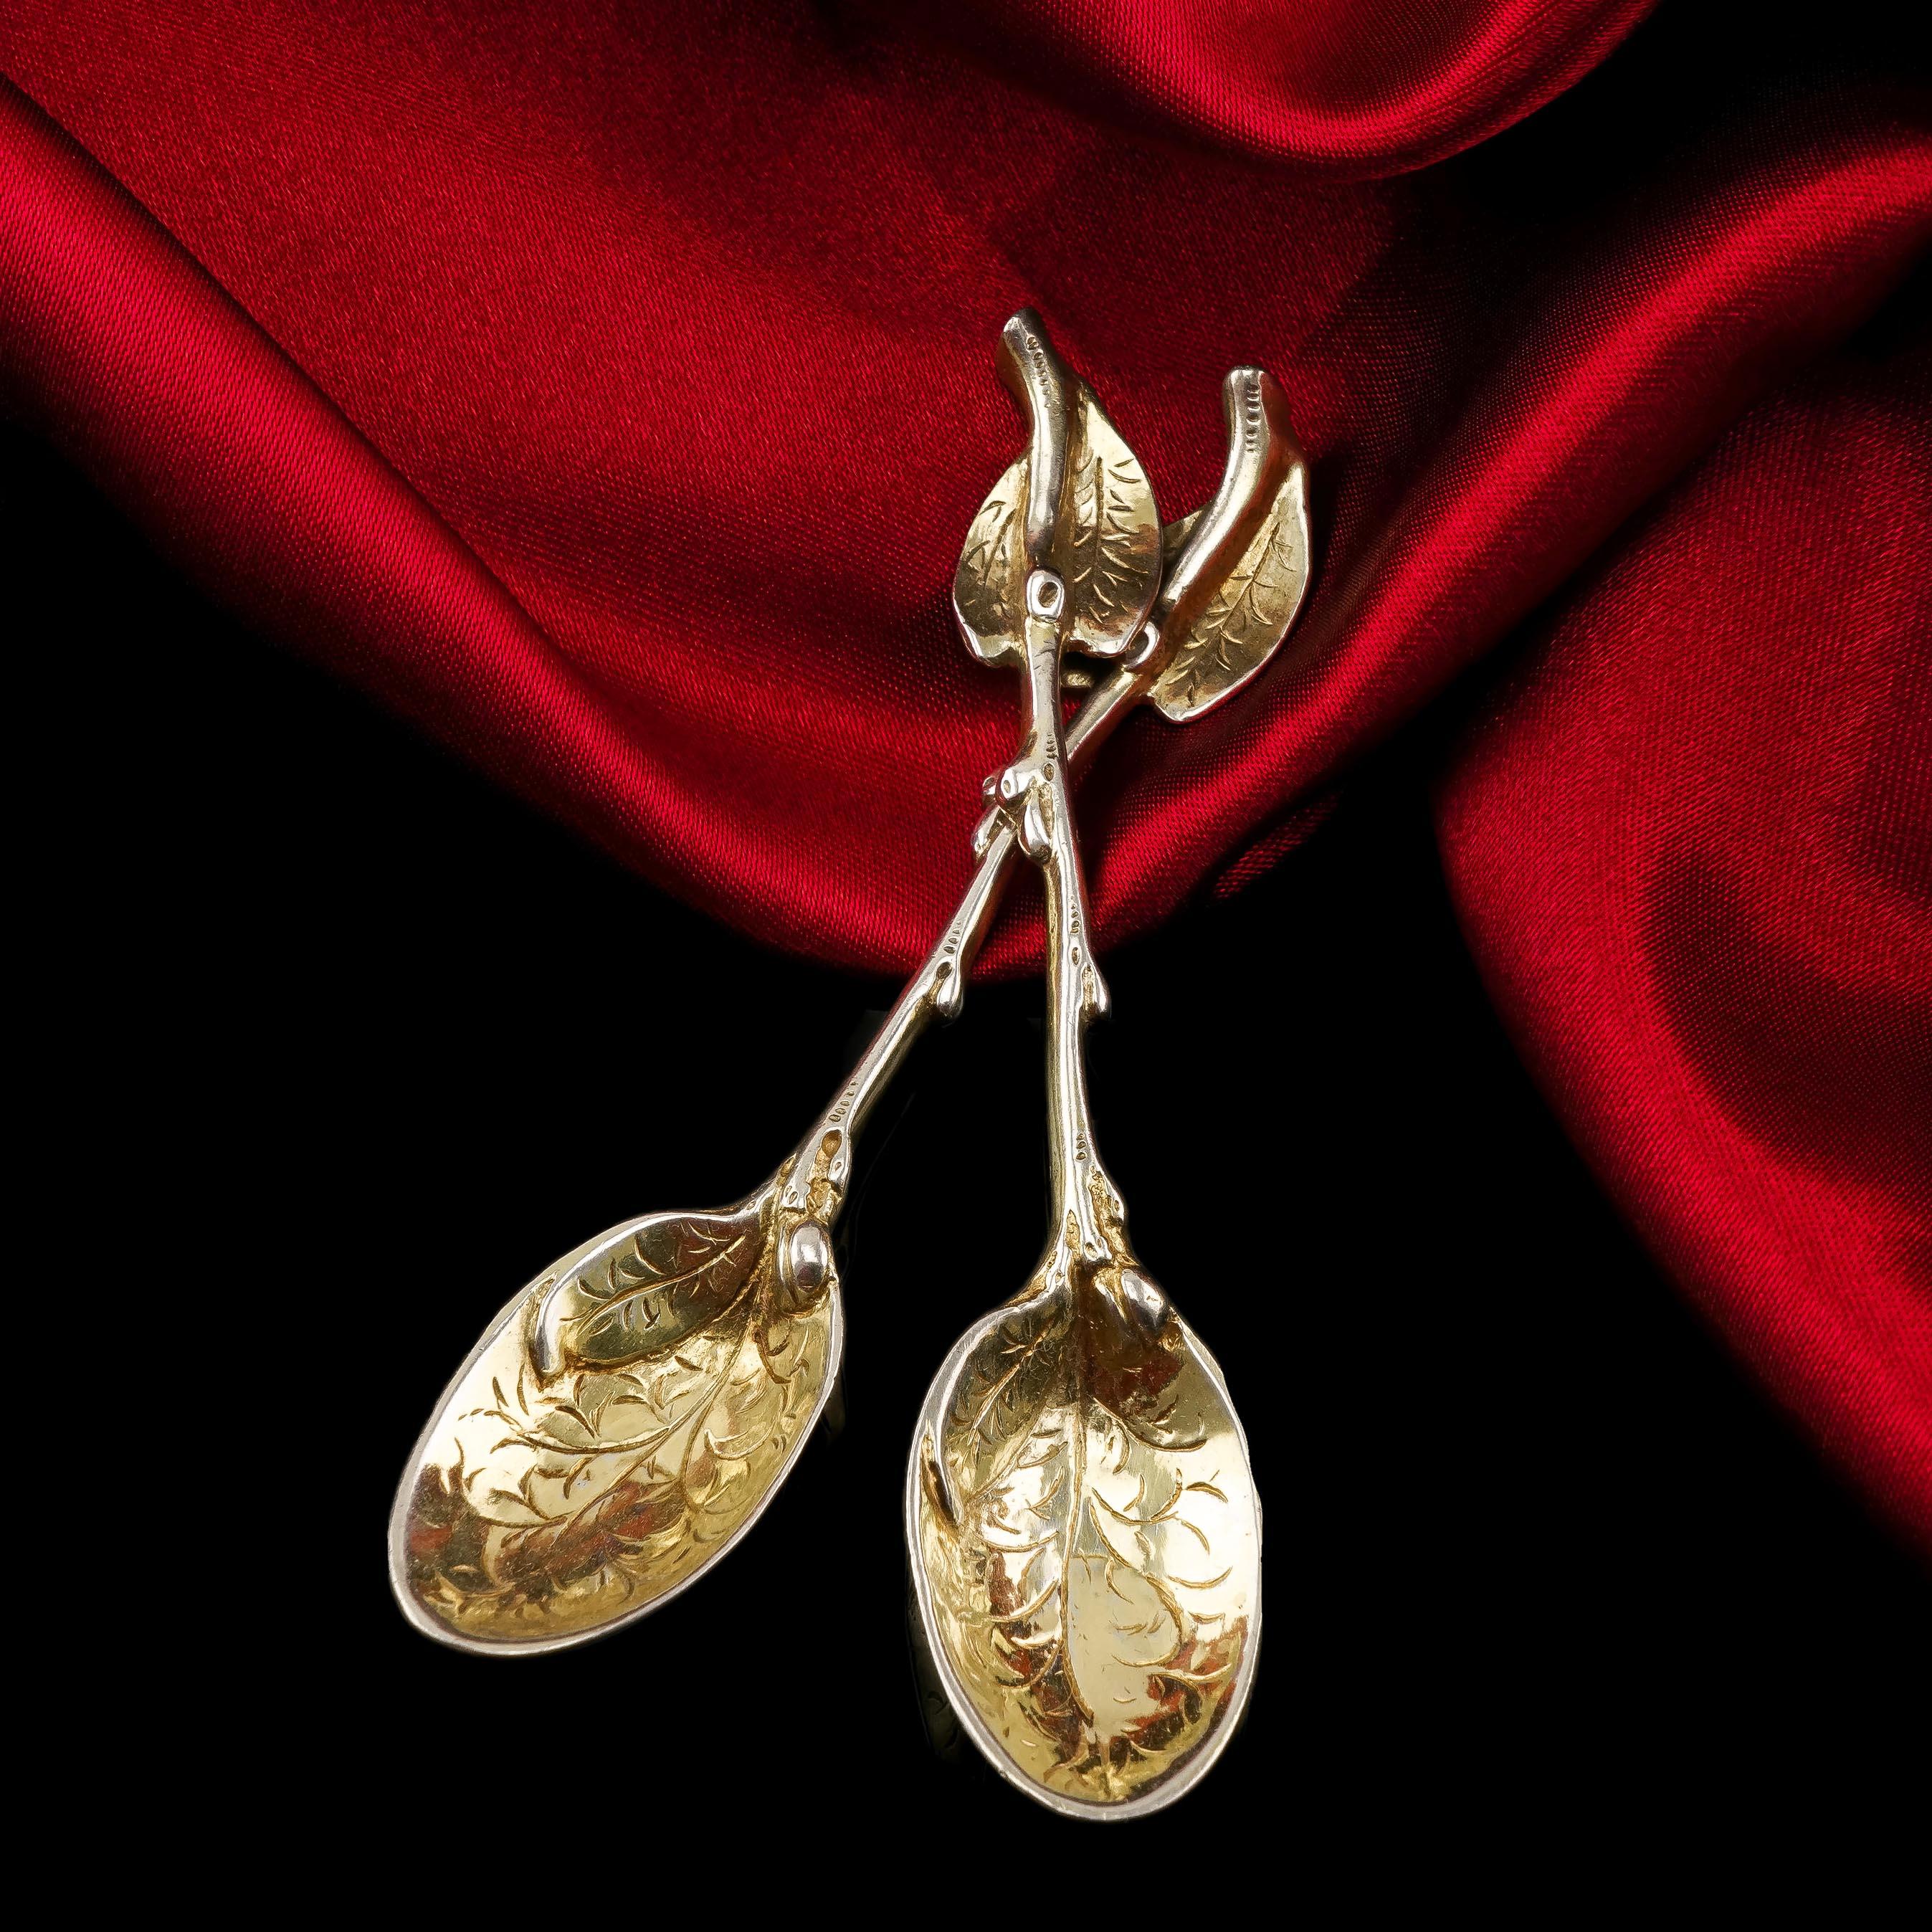 We are delighted to offer this fine and exquisite pair of early Victorian solid silver tea spoons made in London 1842 with the maker's mark of Sebastian Crespell.
 
The pair features a highly ornate and desirable 'naturalistic' design with the